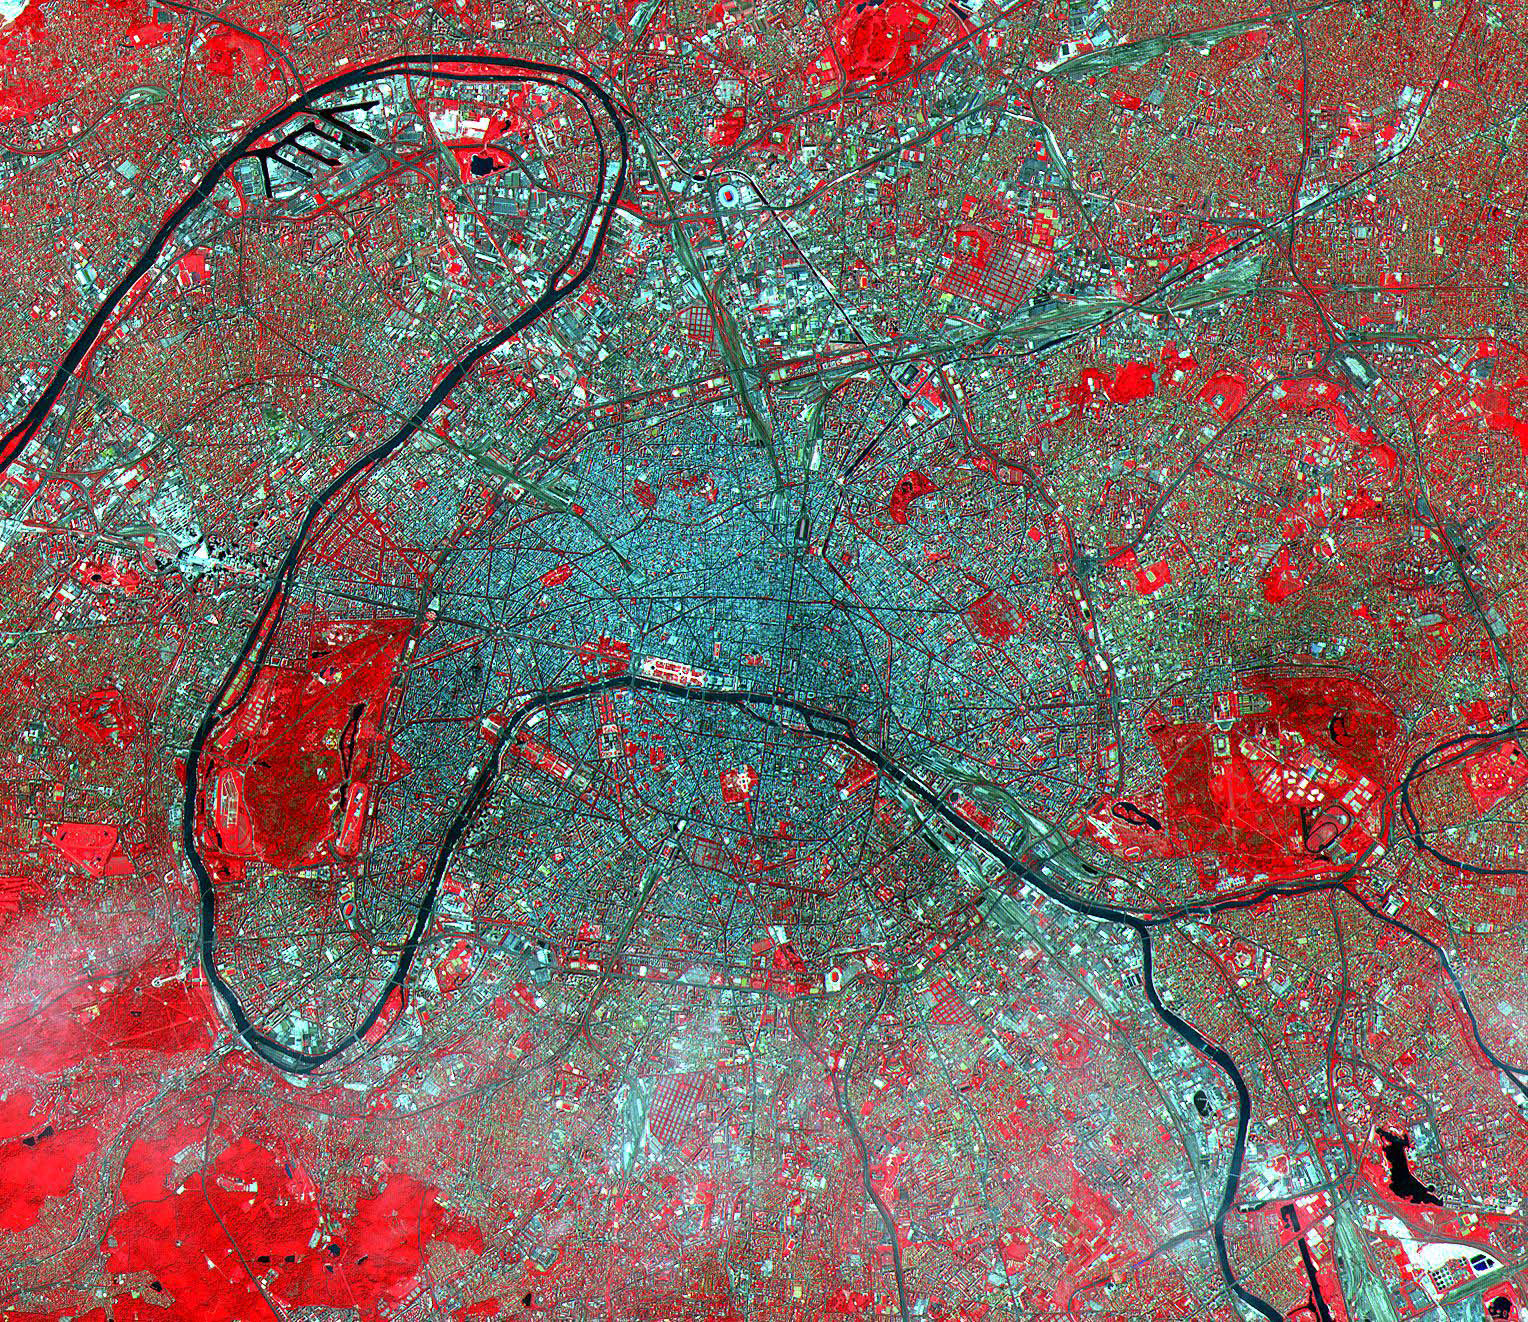 This image of Paris captures data from visible to thermal infrared wavelengths, which displays vegetation in red. It was acquired on July 23, 2000.